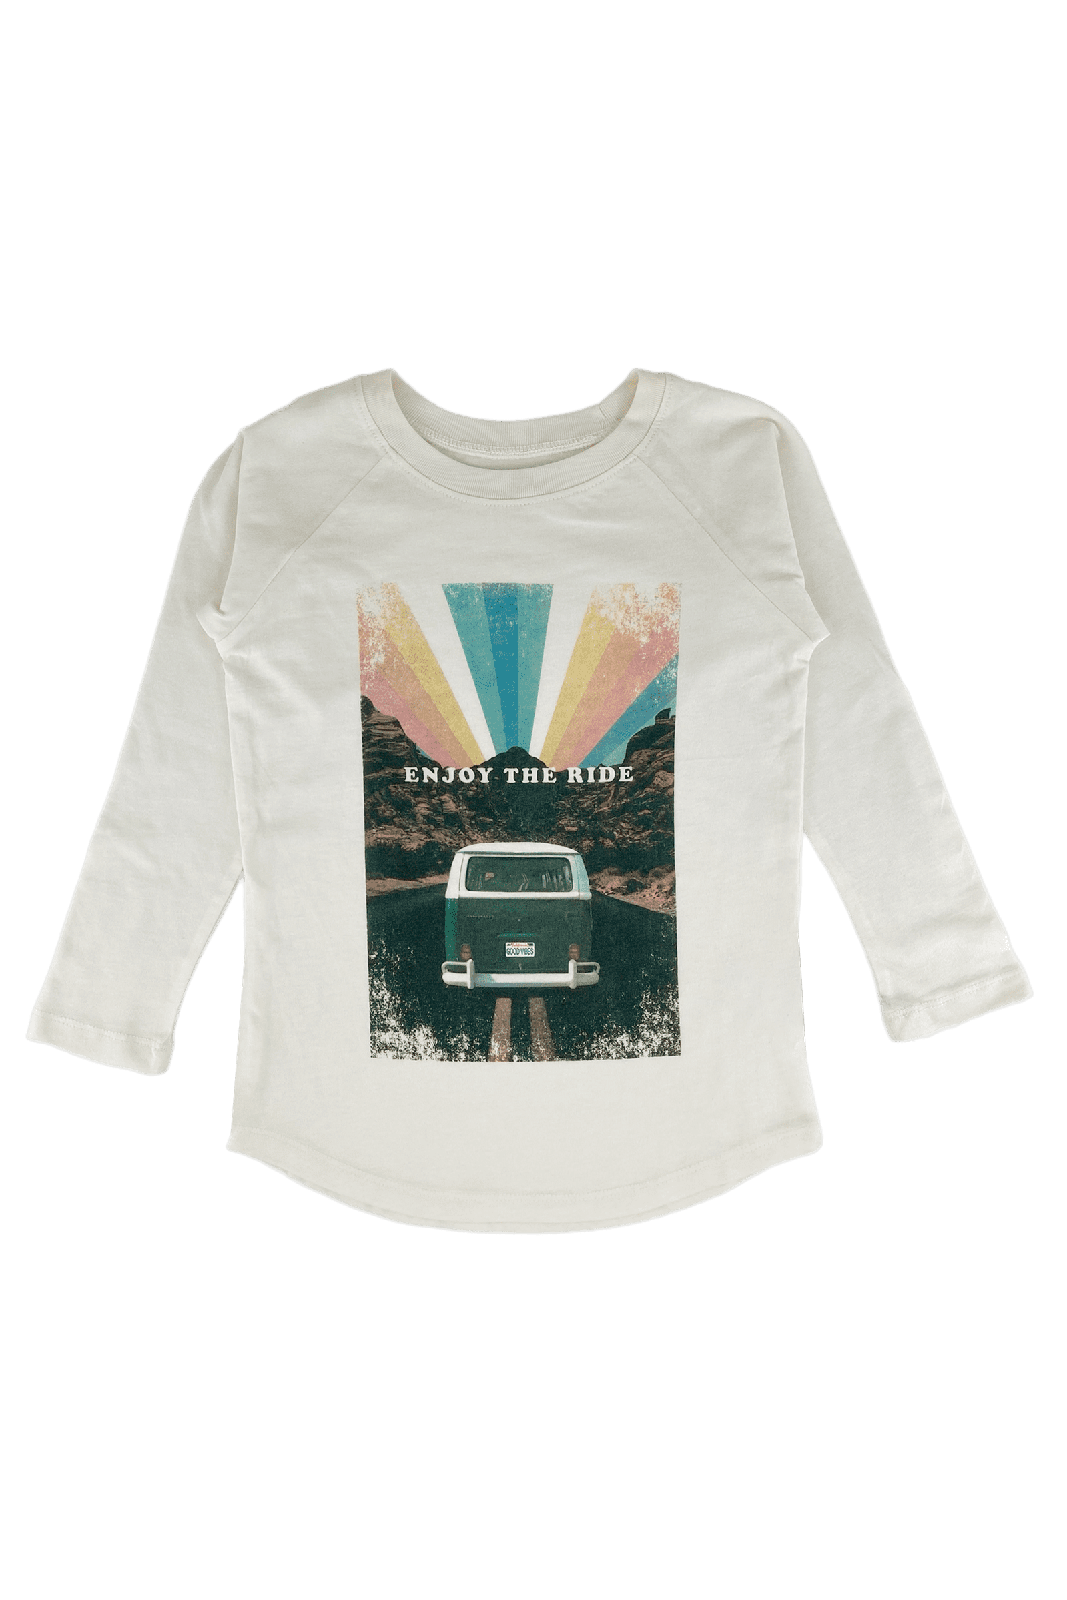 'Enjoy the Ride' Long Sleeve Tee Tea for Three: A Children's Boutique